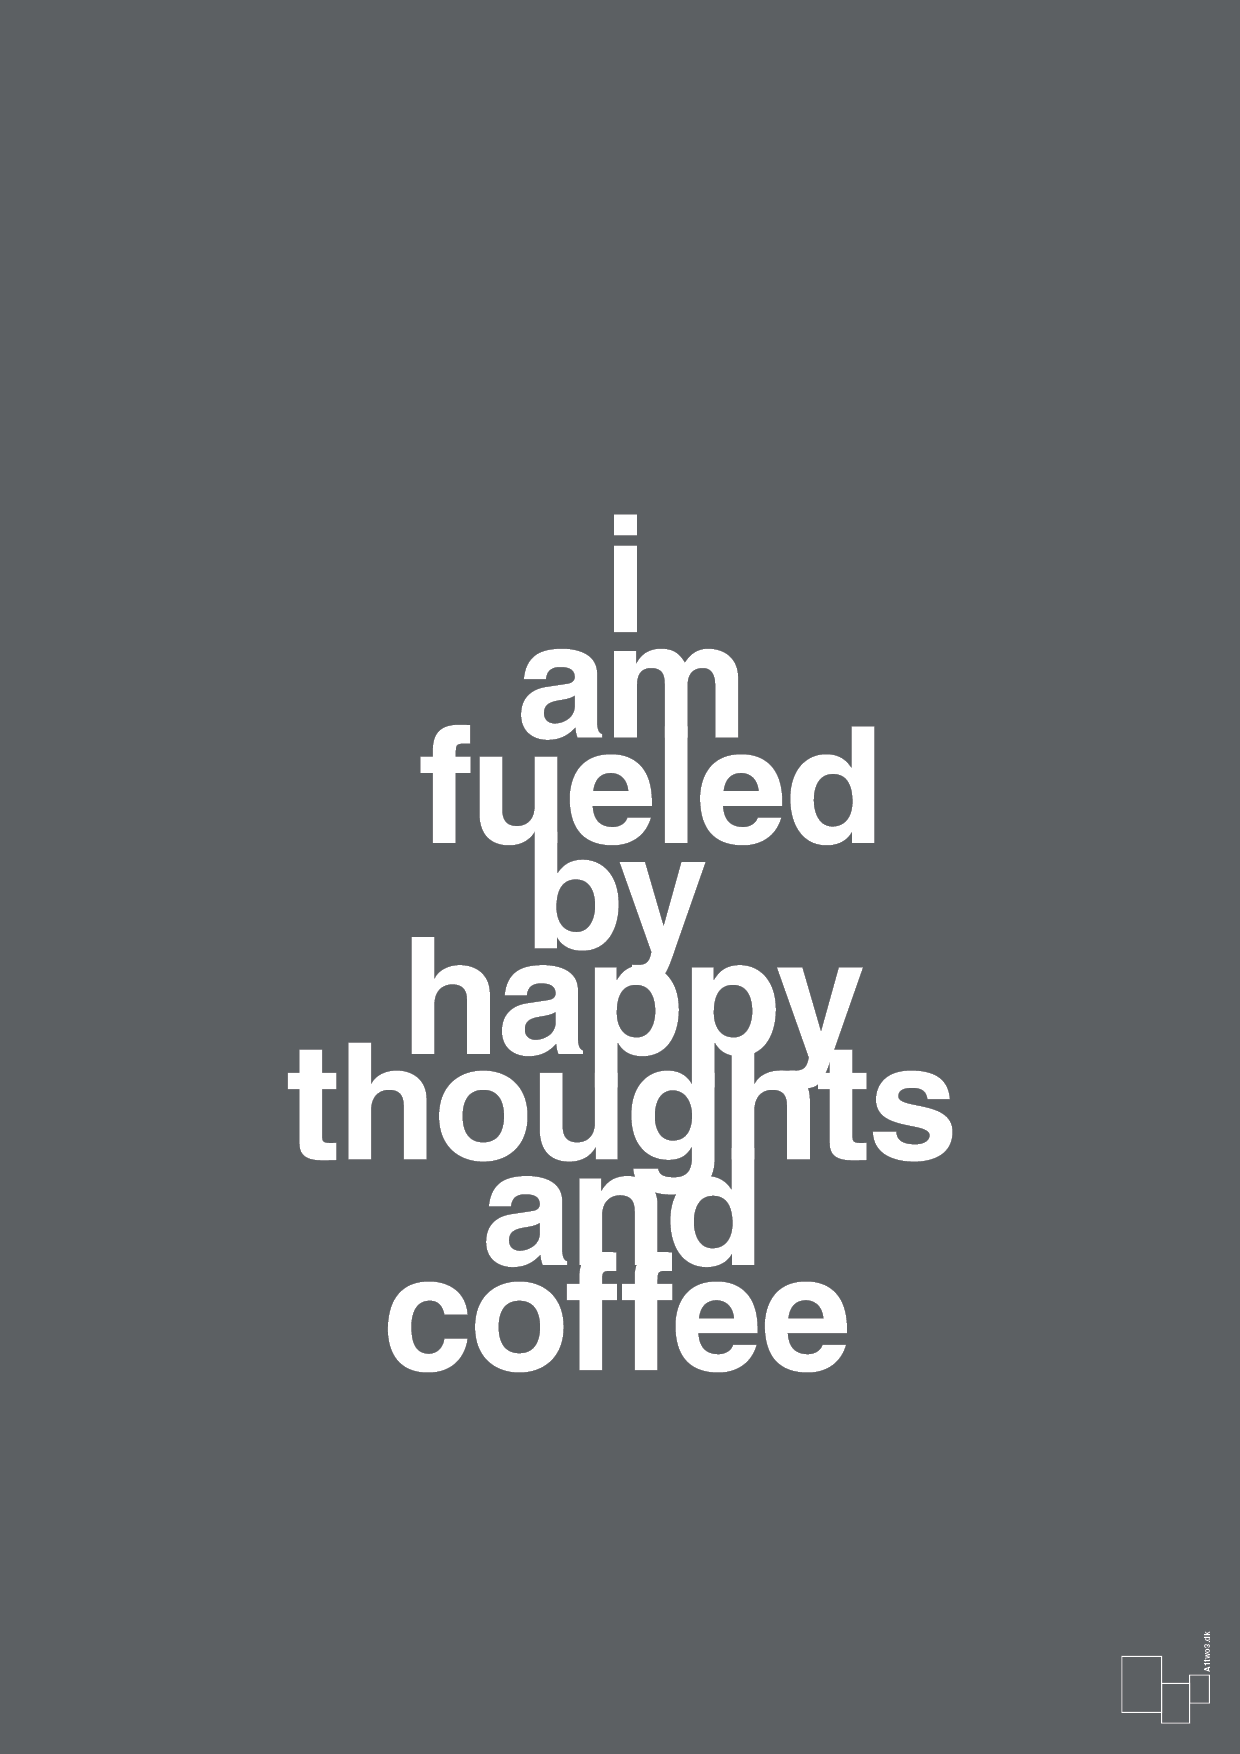 i am fueled by happy thoughts and coffee - Plakat med Mad & Drikke i Graphic Charcoal